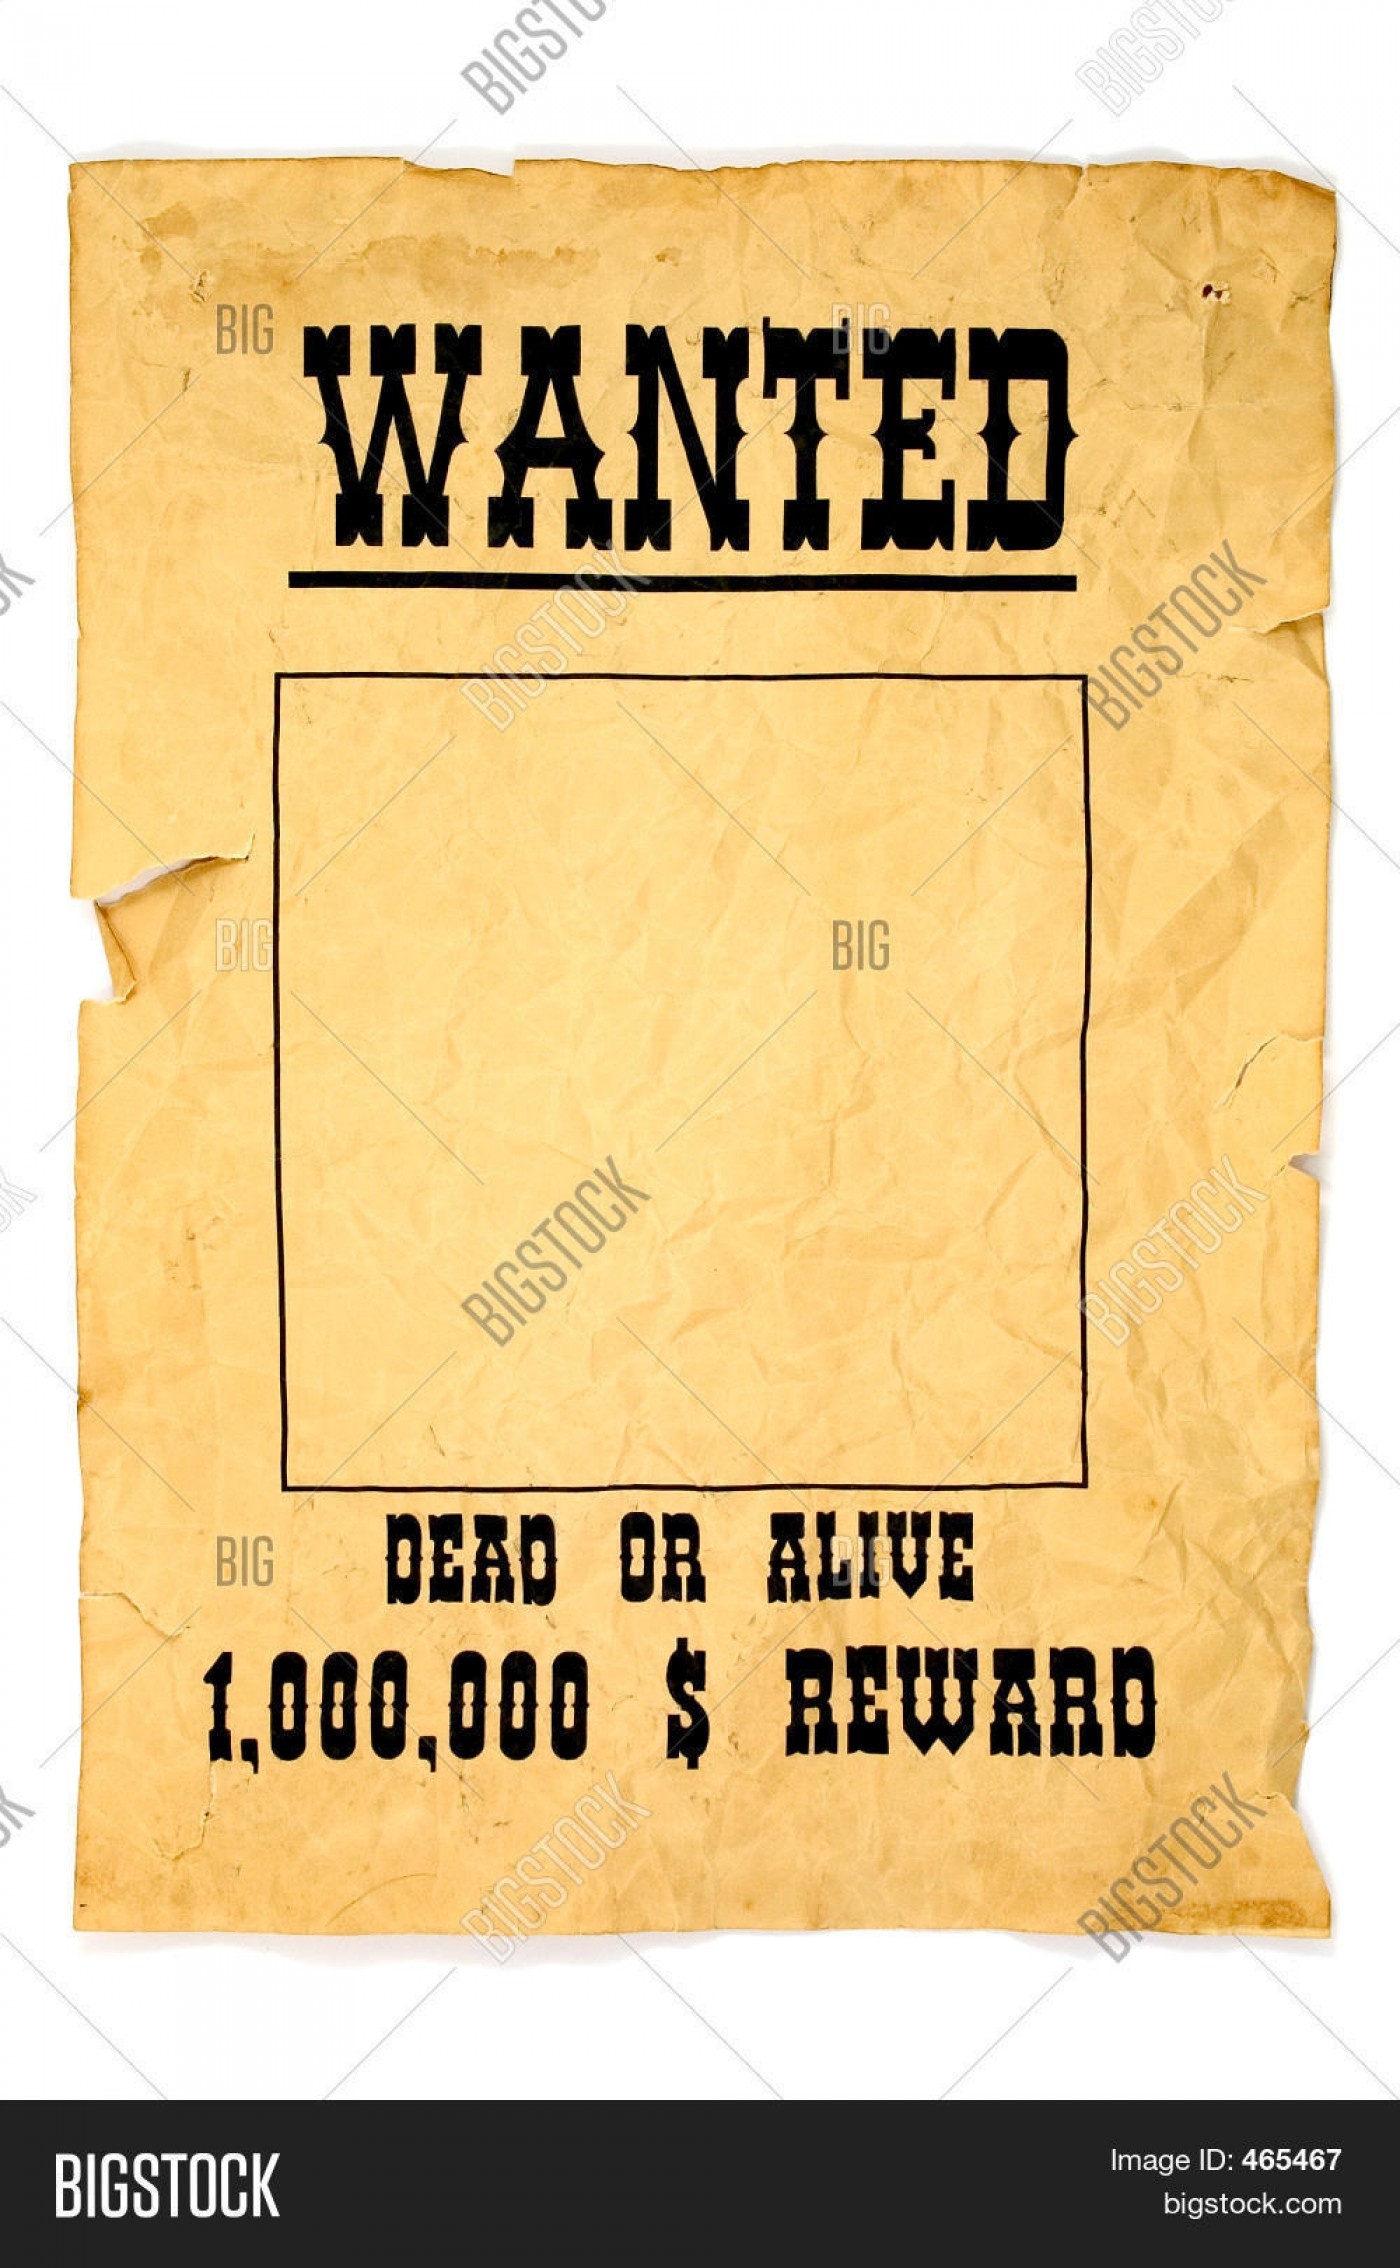 007 Free Wanted Poster Template Printable Wantedster For Word Kids - Wanted Poster Printable Free